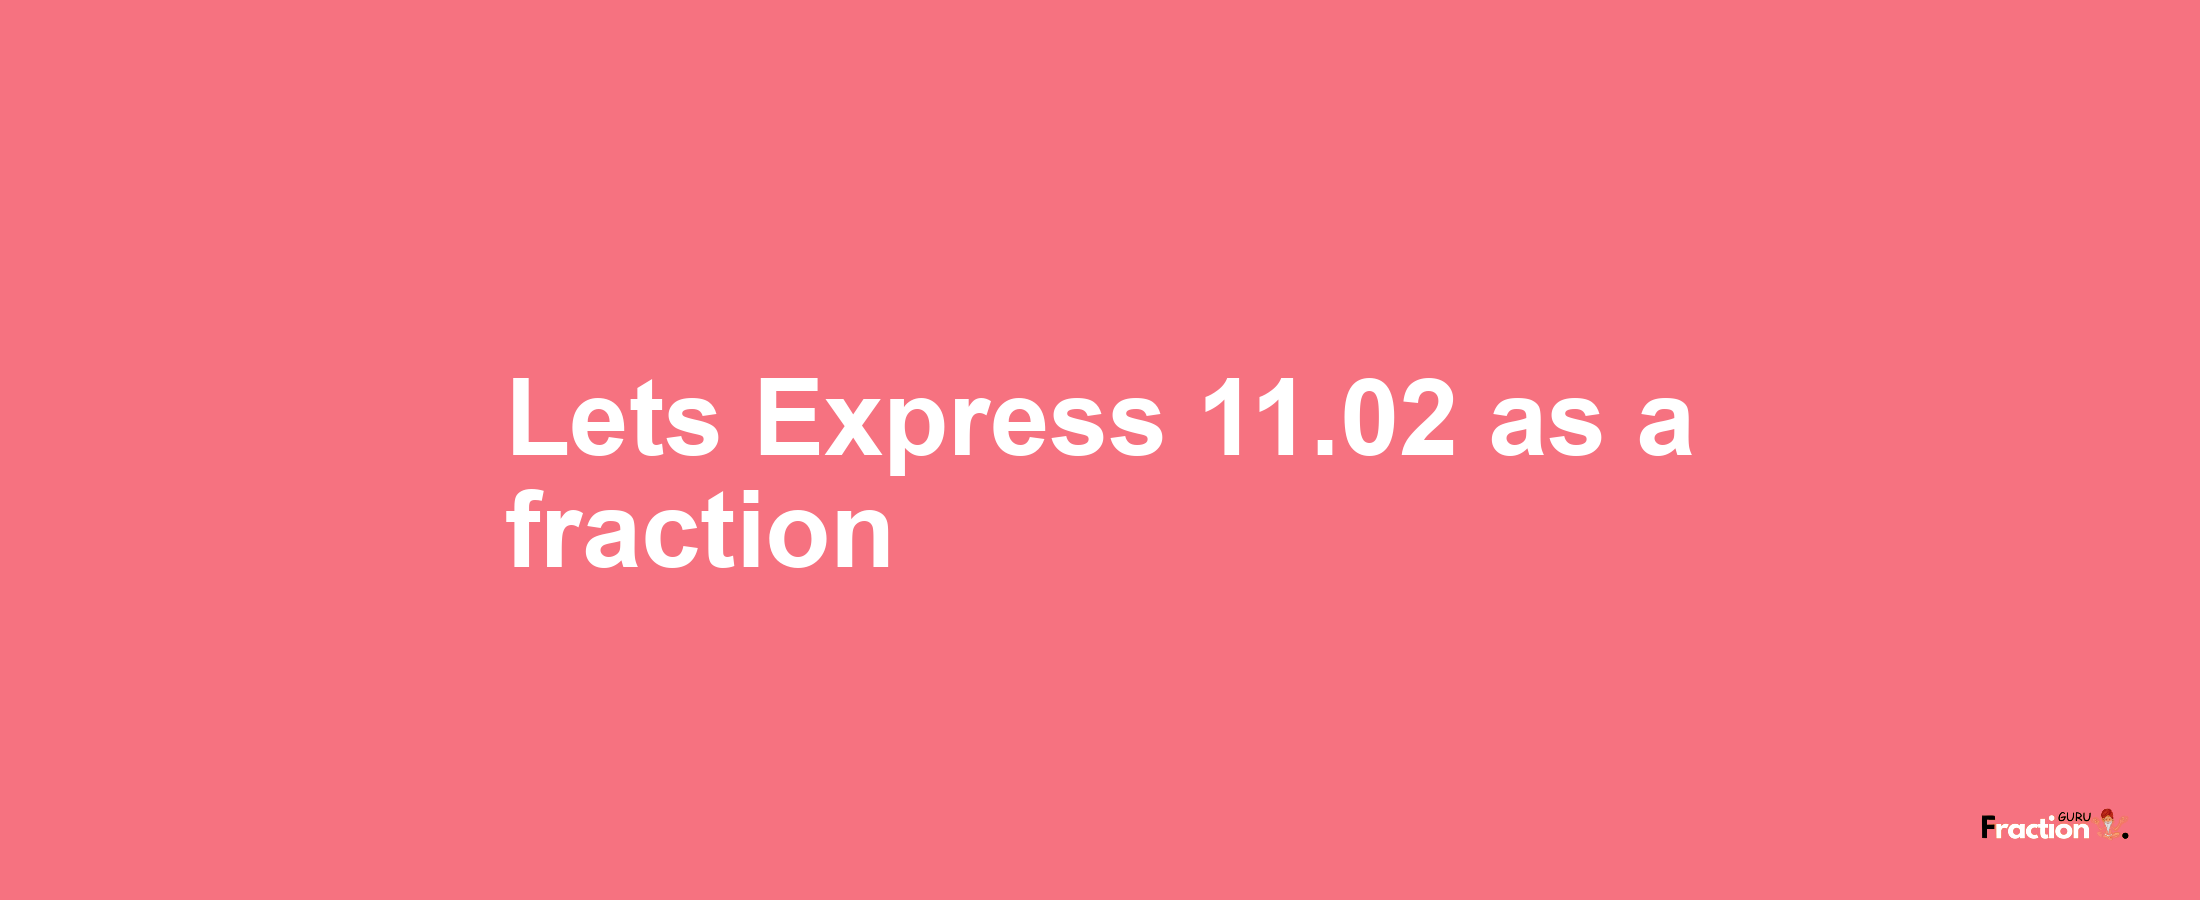 Lets Express 11.02 as afraction